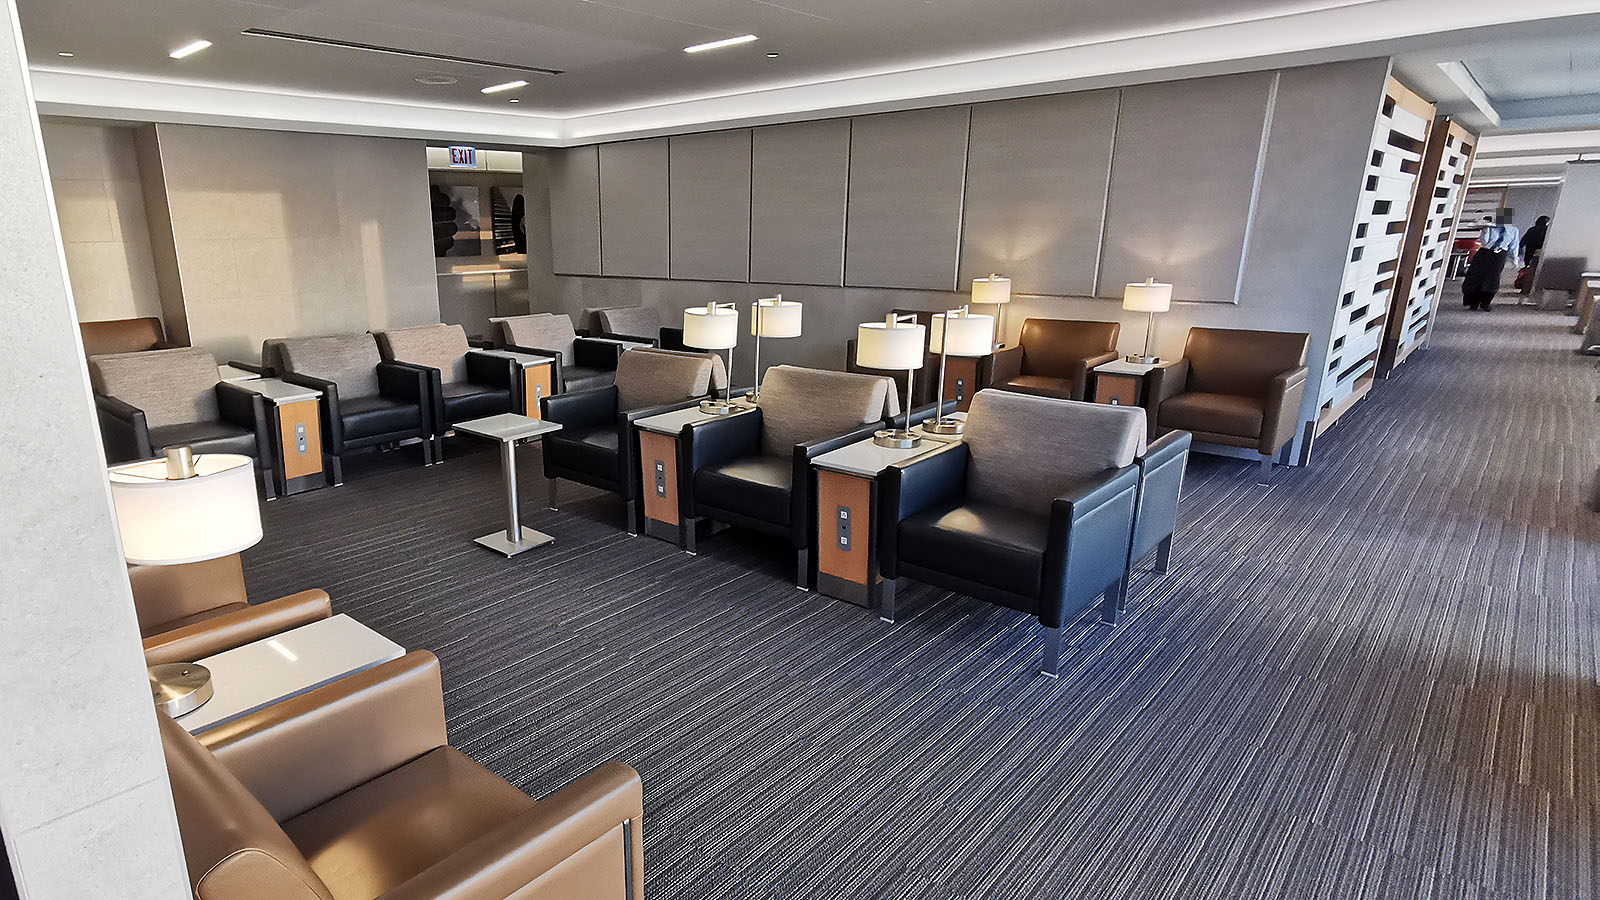 Seating at AA's Flagship Lounge in Chicago